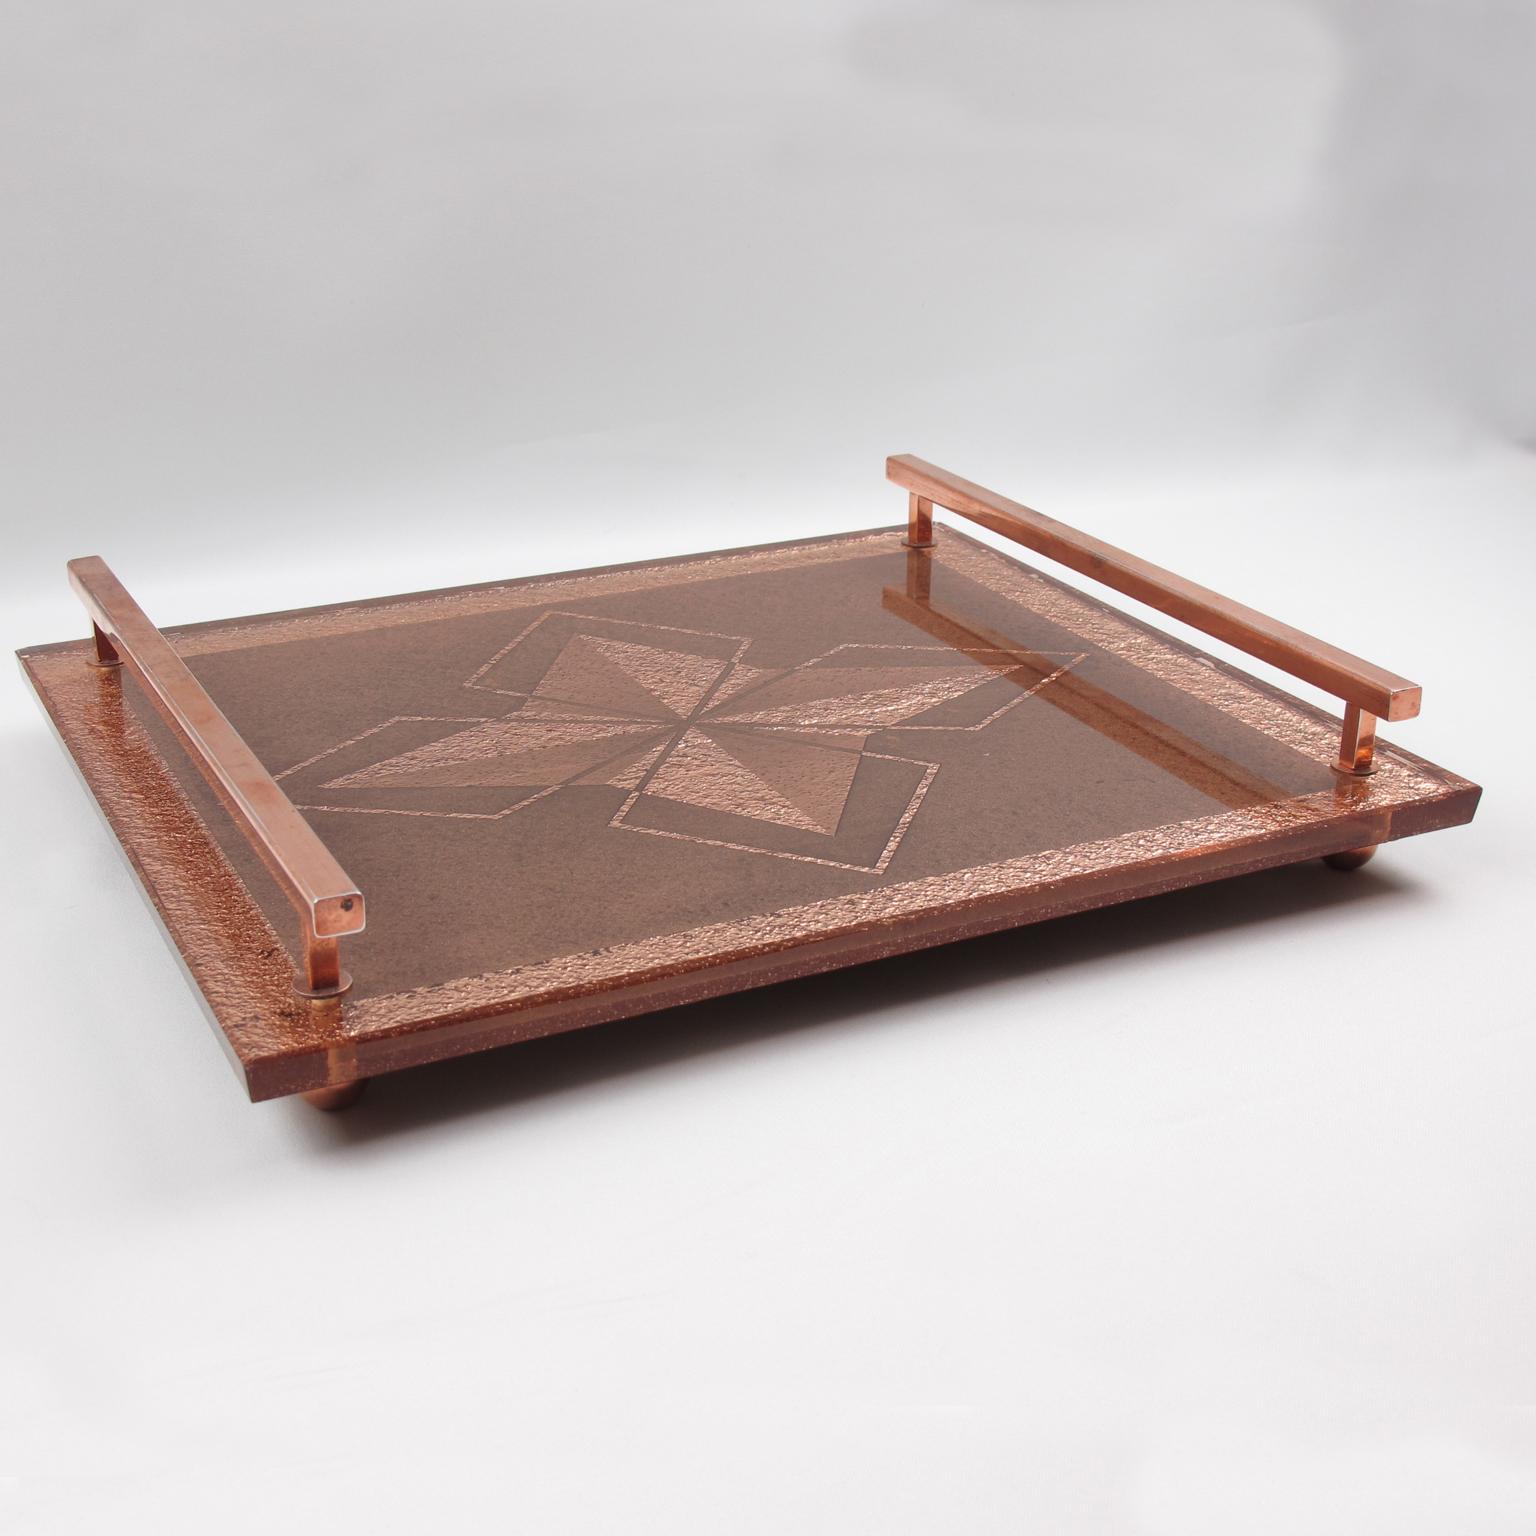 Atelier Pansart Style Art Deco Copper Mirrored Glass Serving Tray, France 1940s In Good Condition For Sale In Atlanta, GA